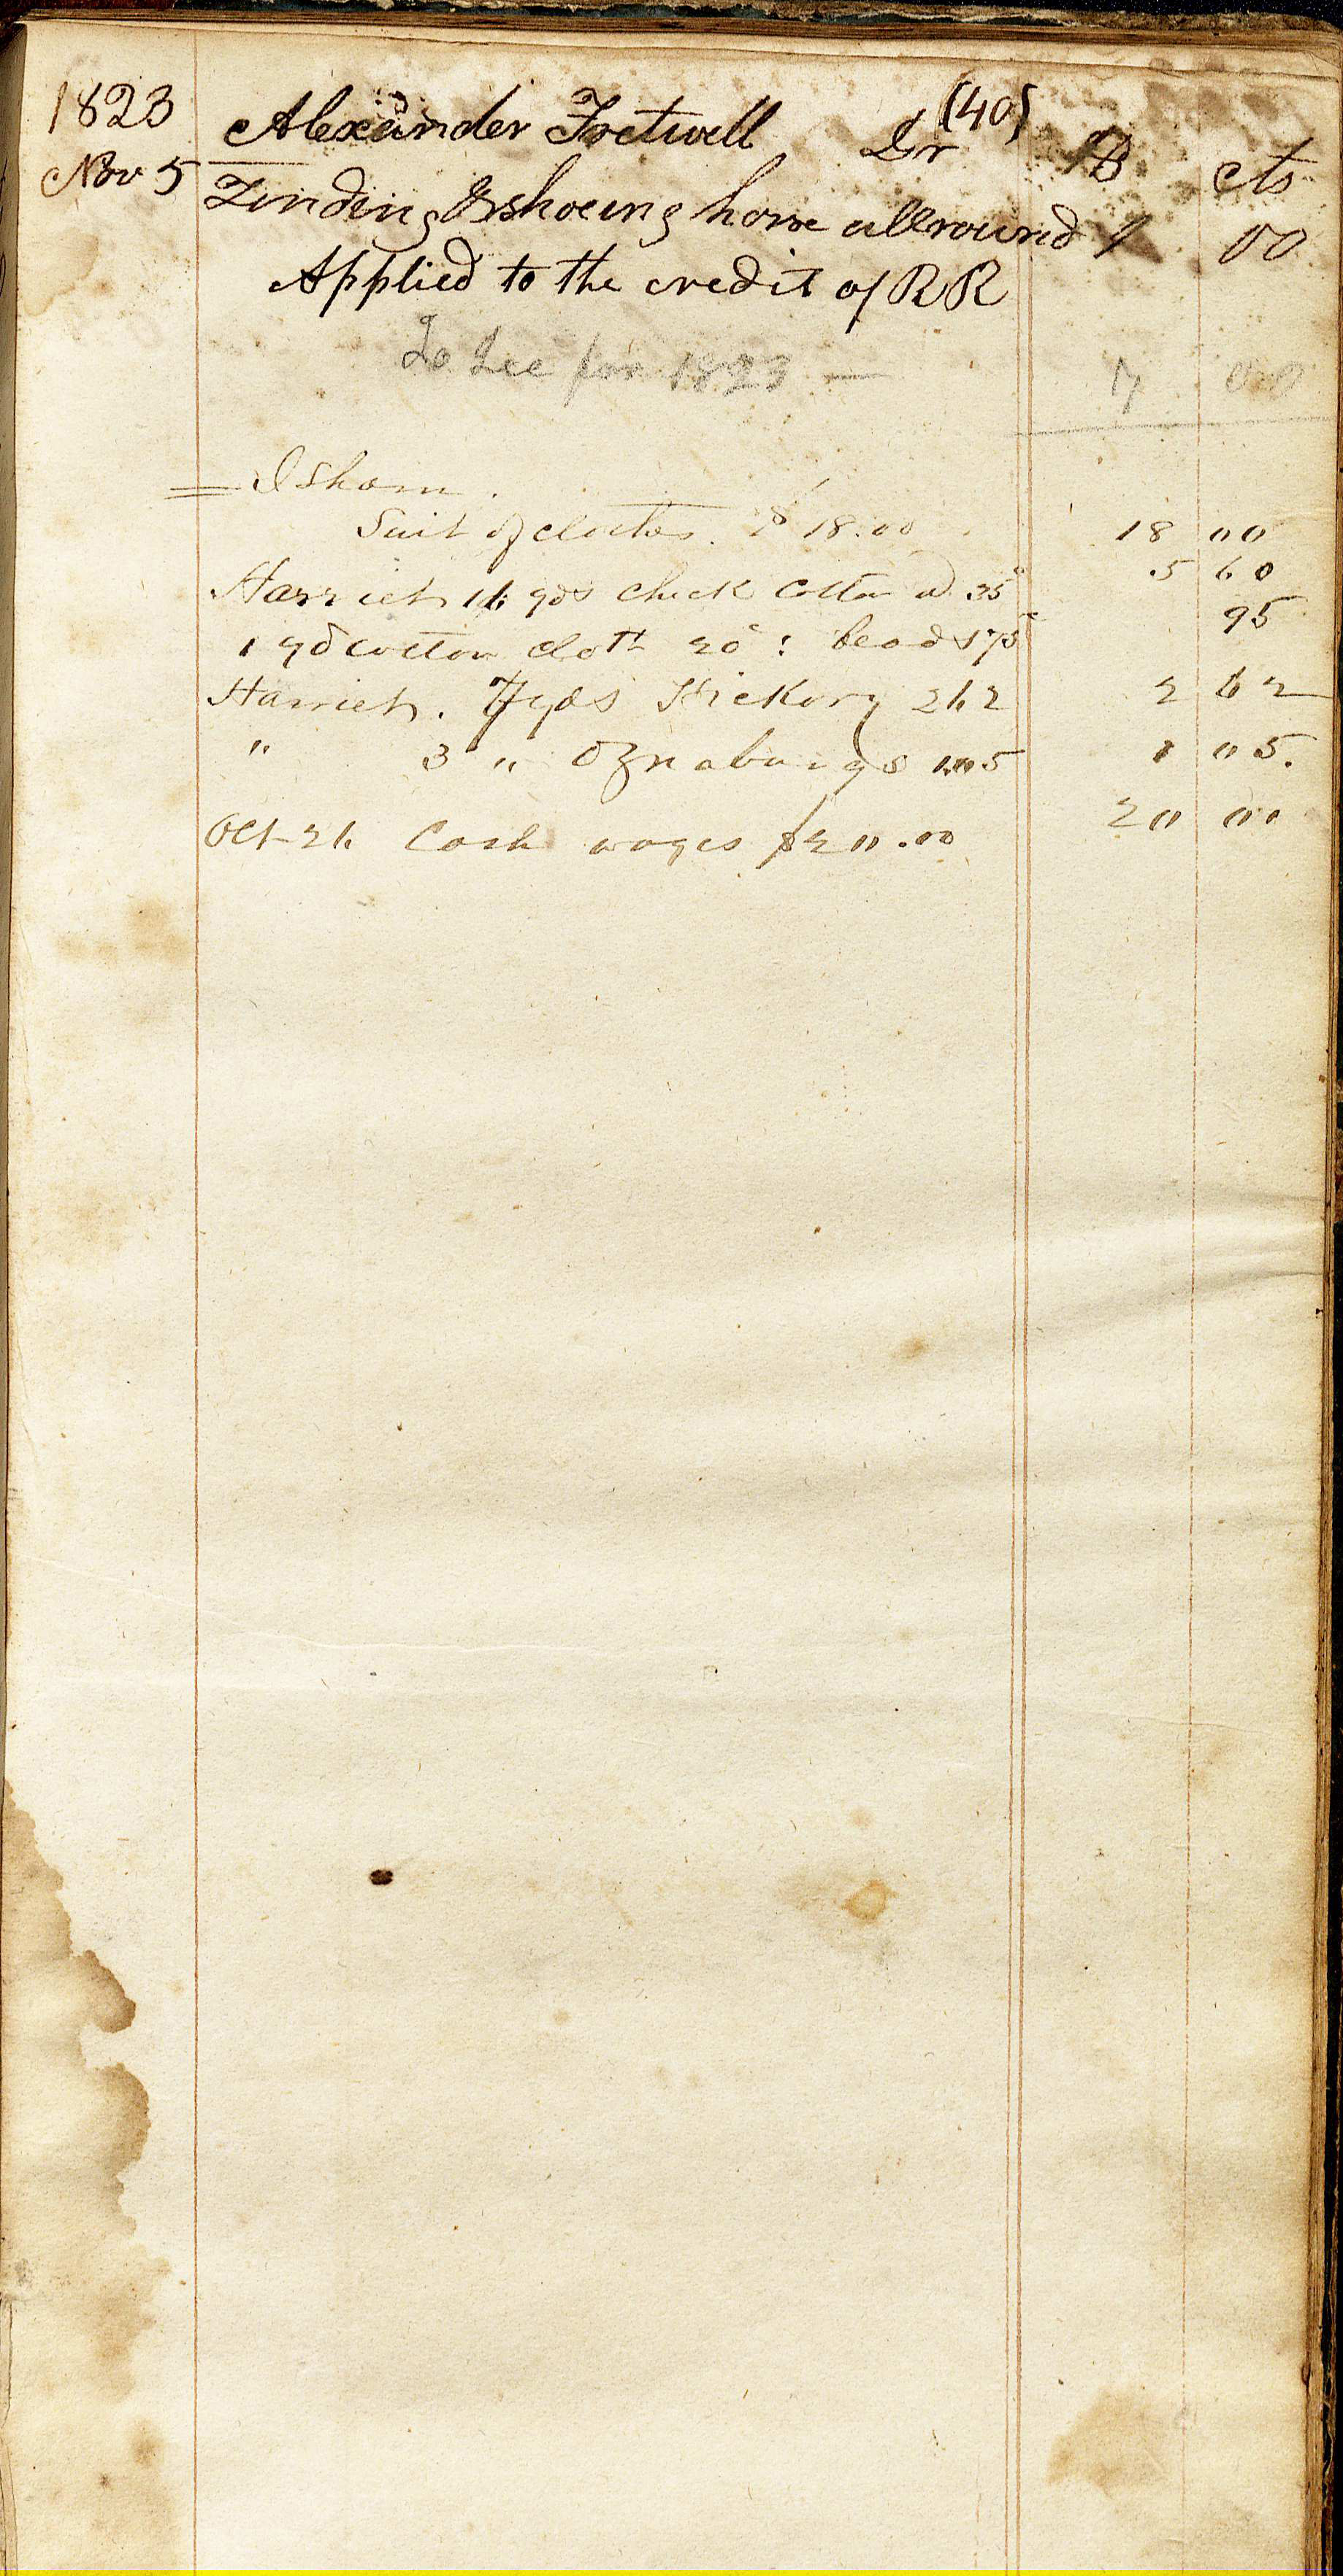 On this page of the Rives account book, opposite of  Nicey's entry is written the name Isham and under the name "suit of clothes $18.00. The entry dates listed on 1823 but the entry was to have been made much later. Most likely sometime in the 1840's Robert Rives Blacksmith Shop Account Book, 1823; 1843-1846, Accession #4655 (Image by Regina Rush)